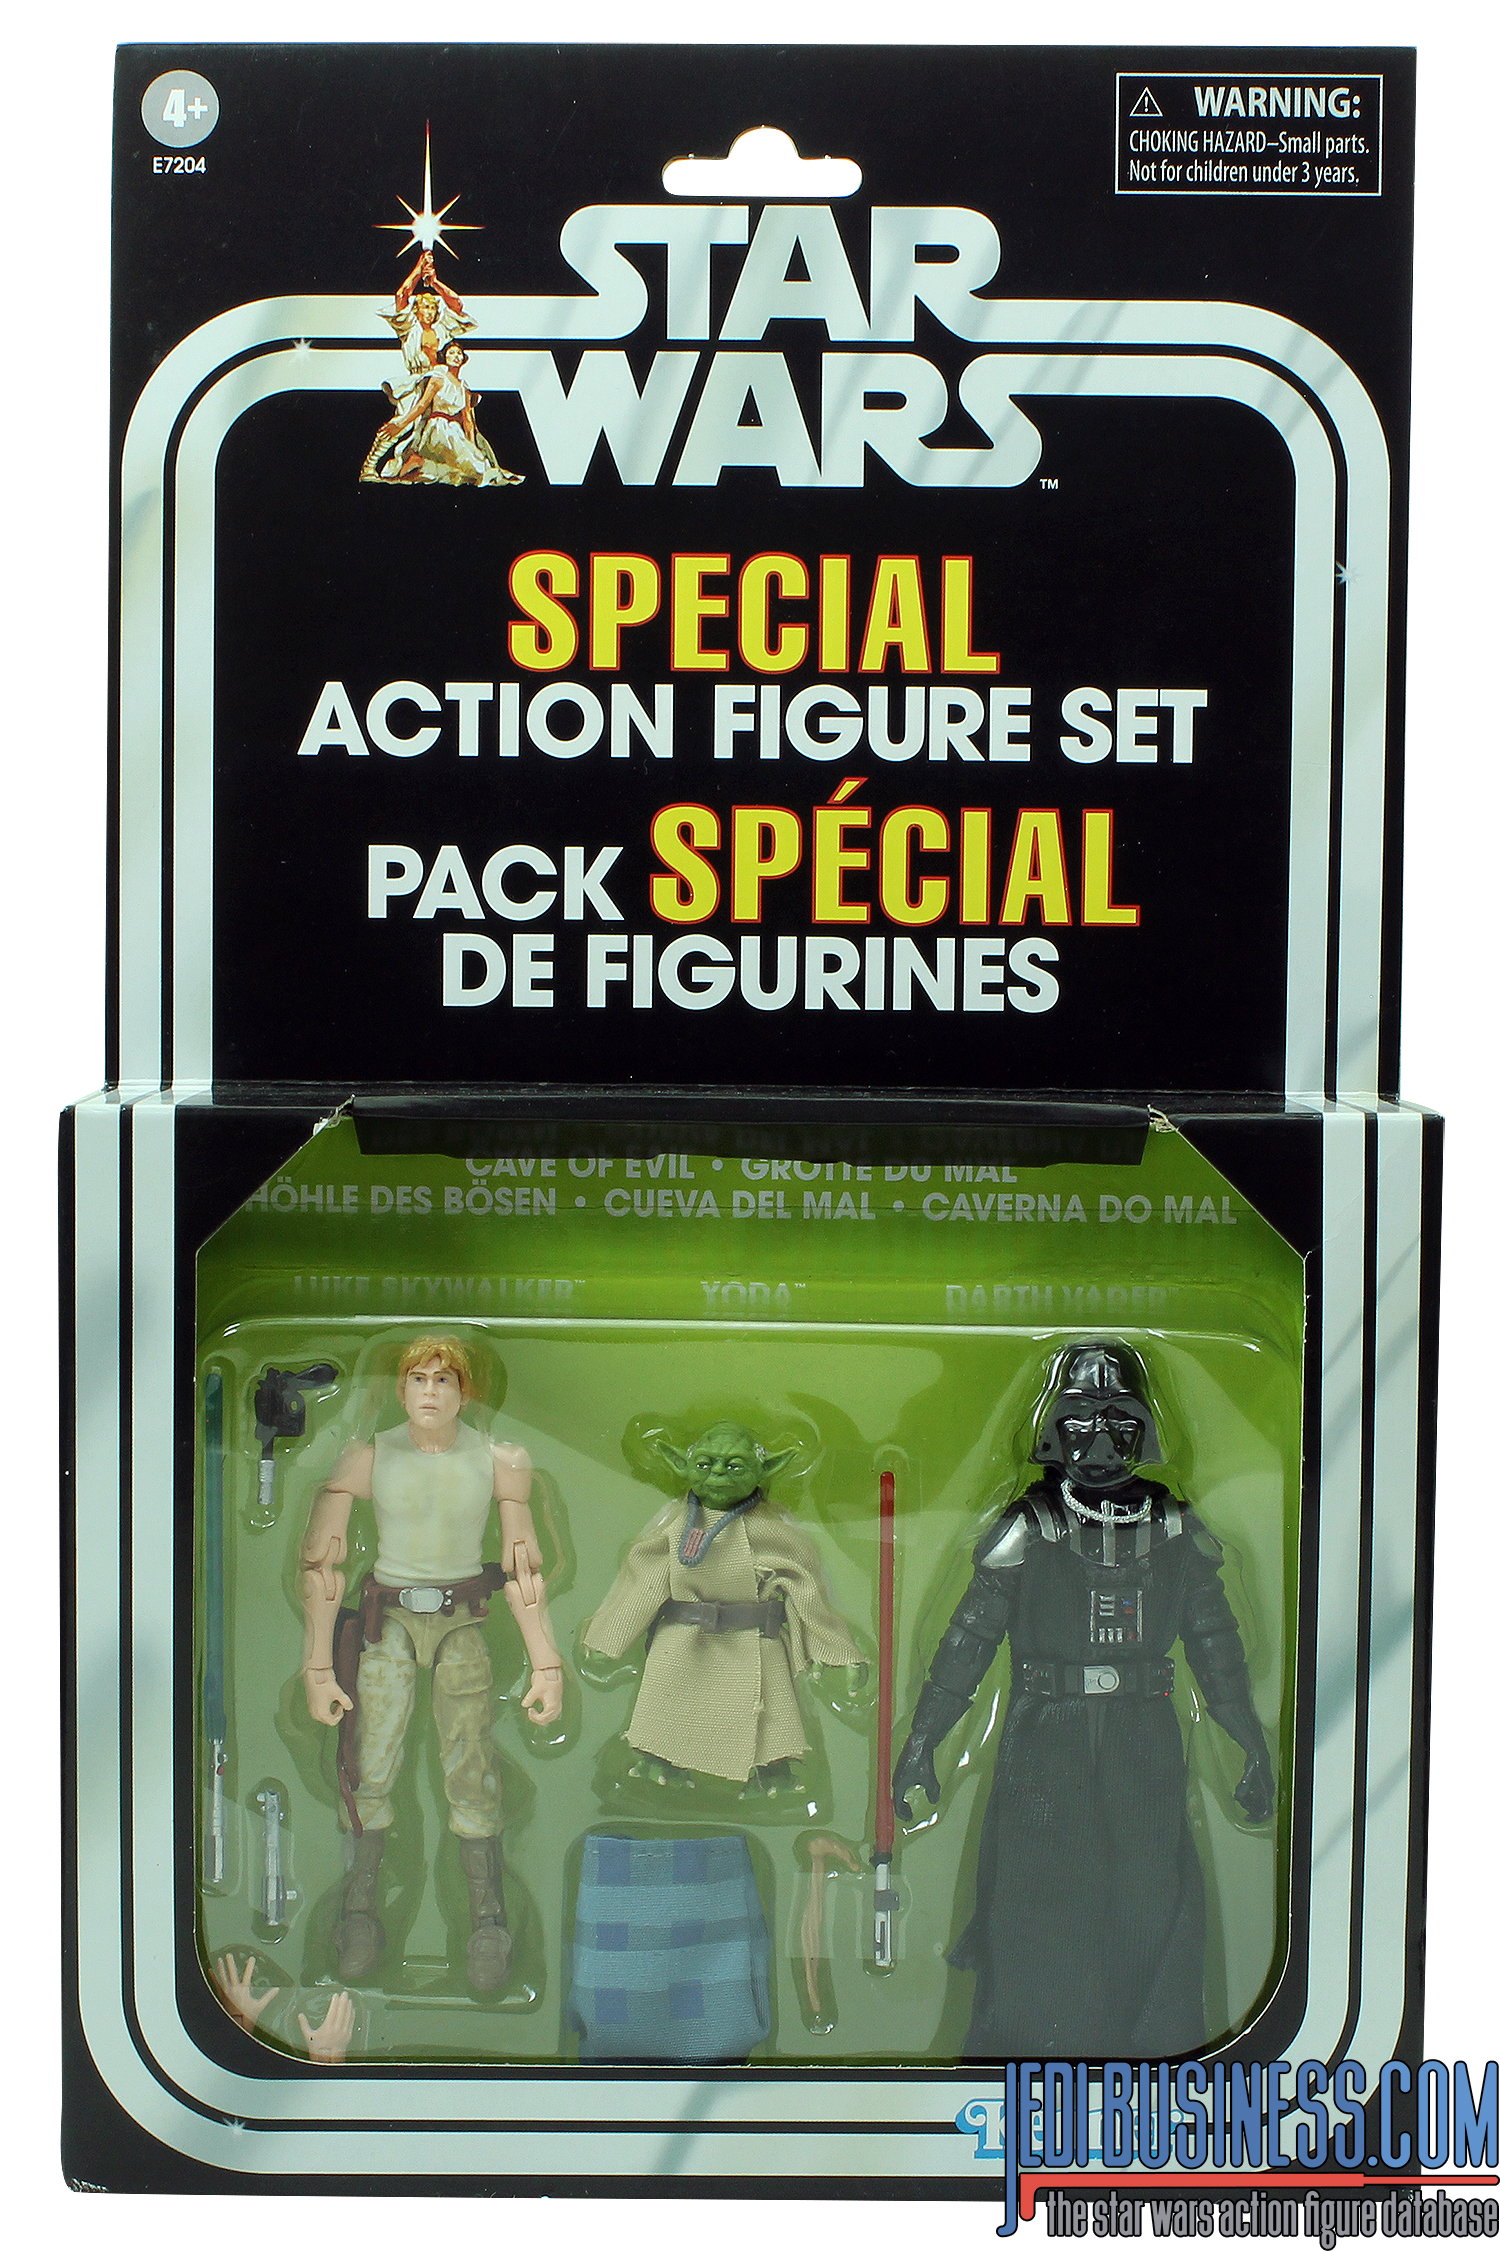 Yoda Cave Of Evil 3-Pack